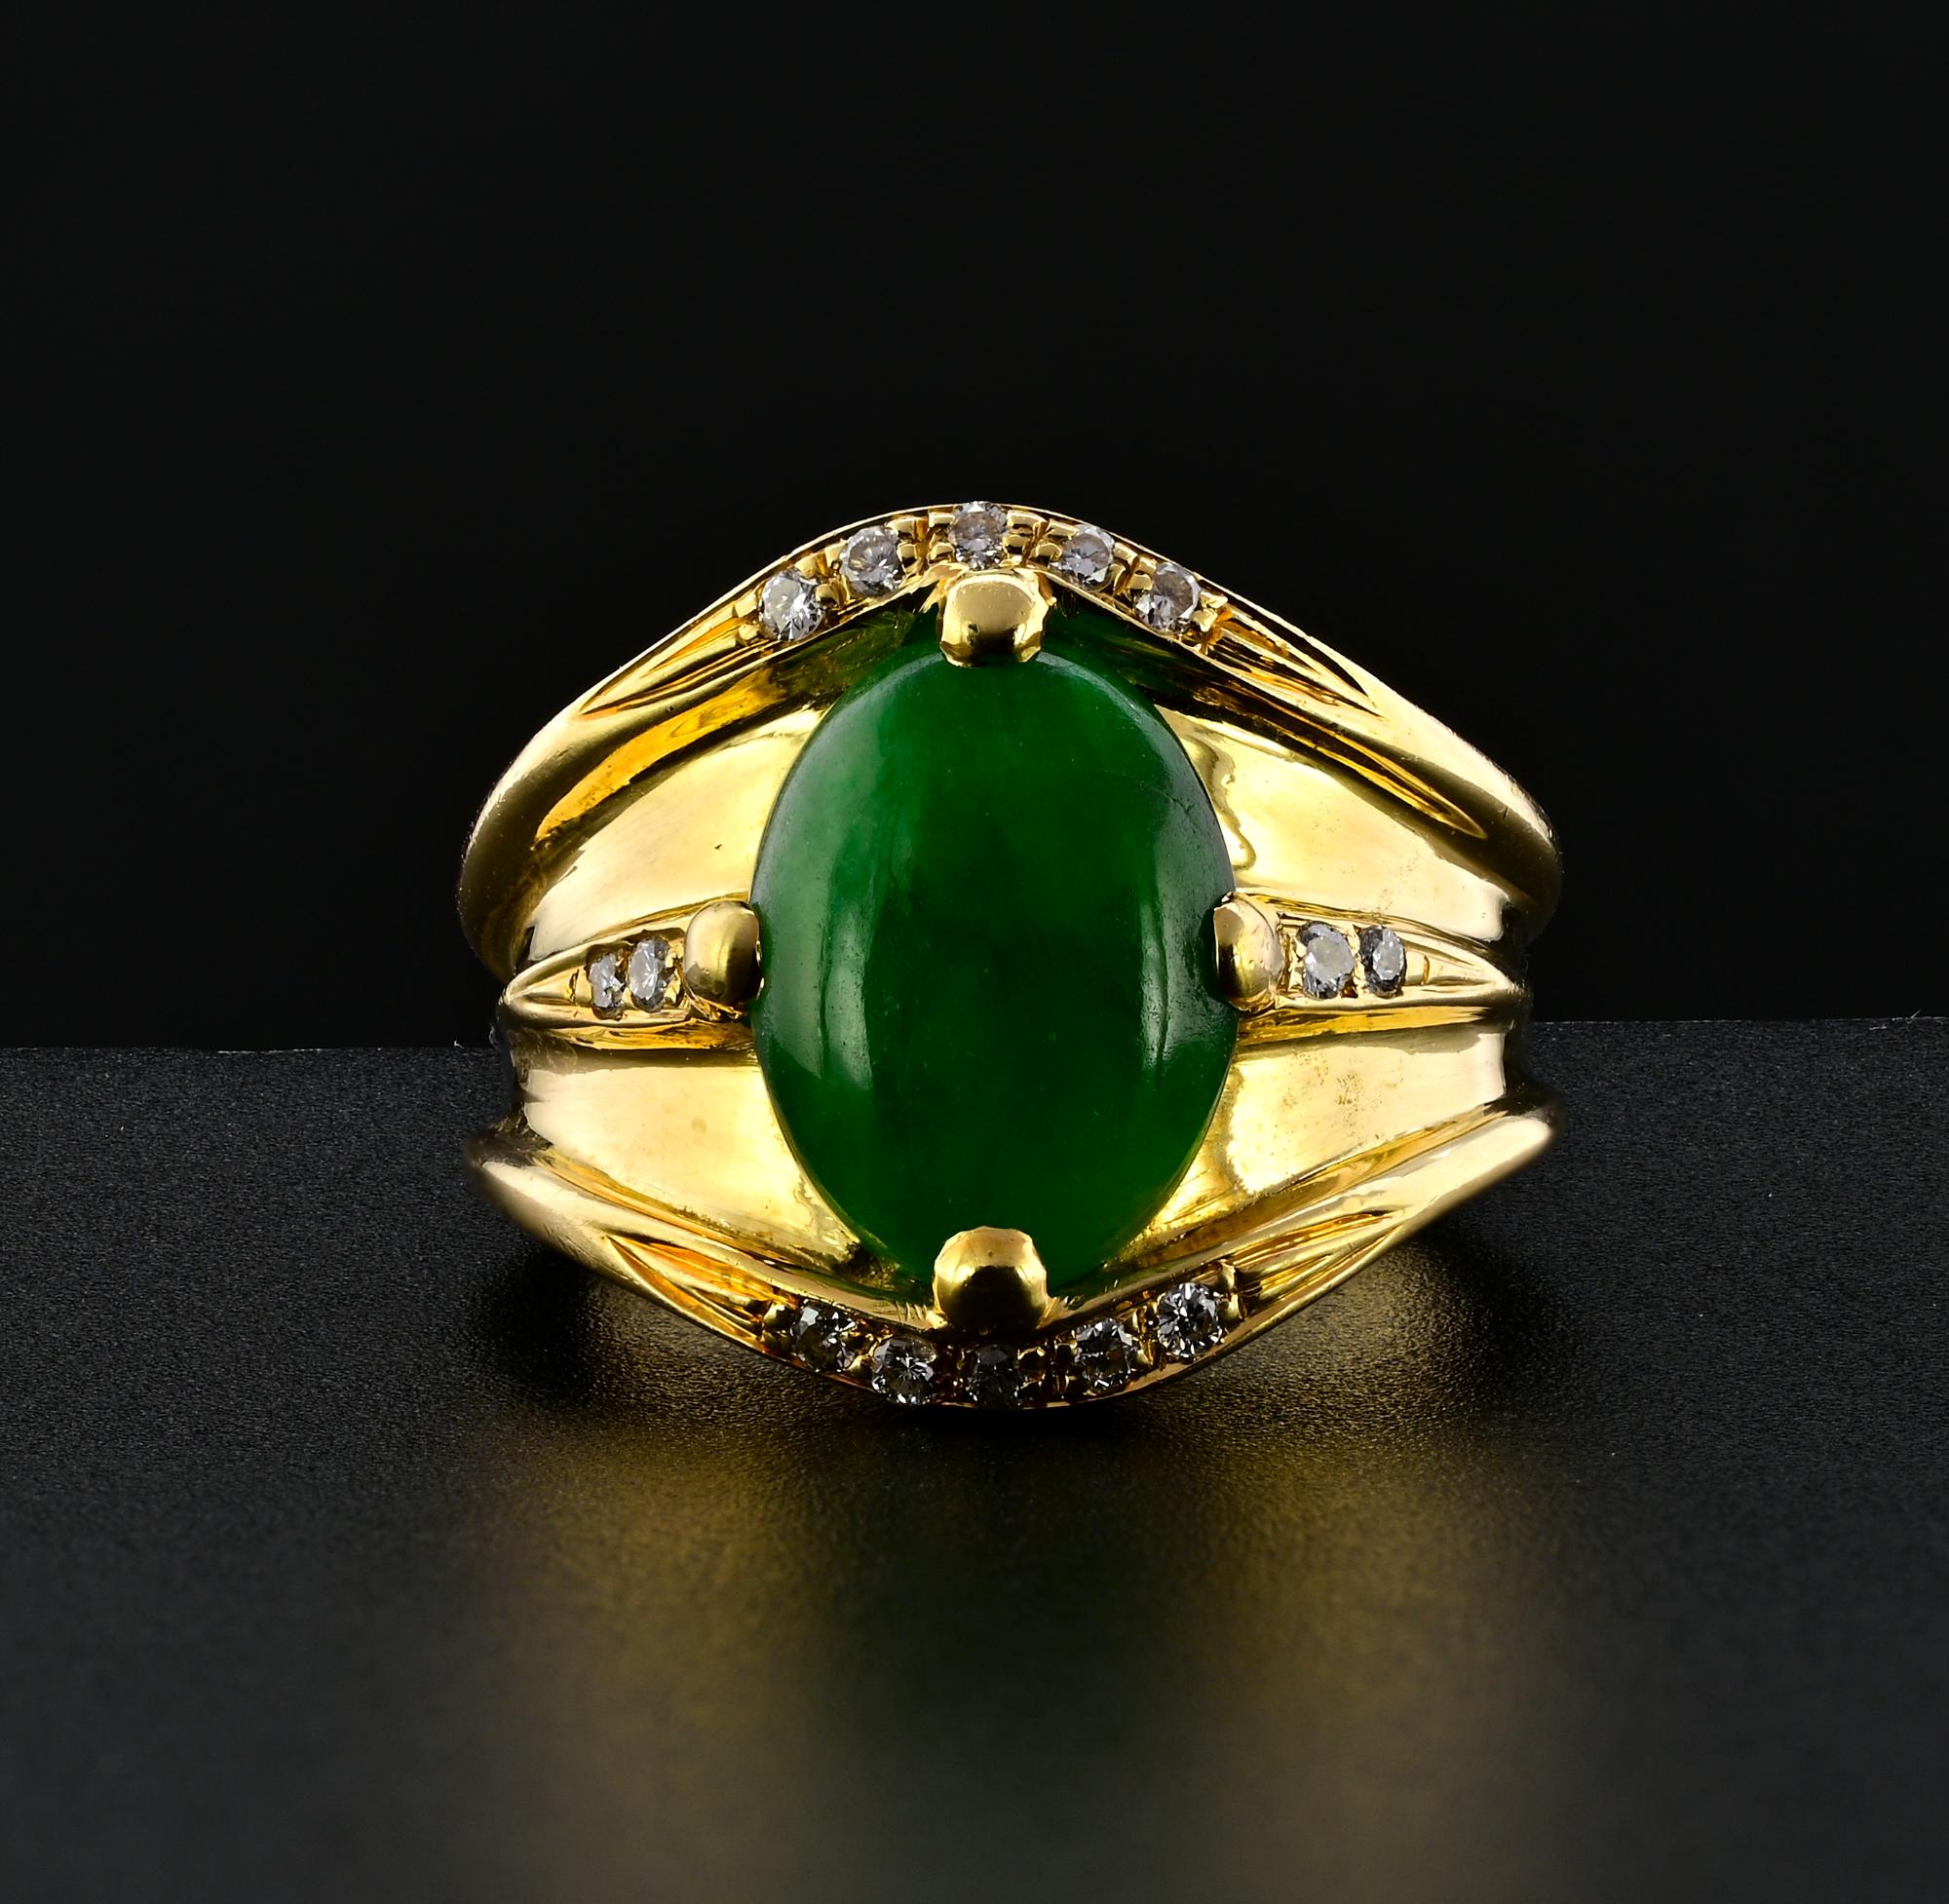 This beautiful vintage ring is 1960 circa
Beautiful designed with a flat head in a substantial 18 KT solid gold mount, sophisticate timeless style
Italian origin
Ring weighs 16.8 grams
Focal point is the center natural Green Jade, lovely in color,